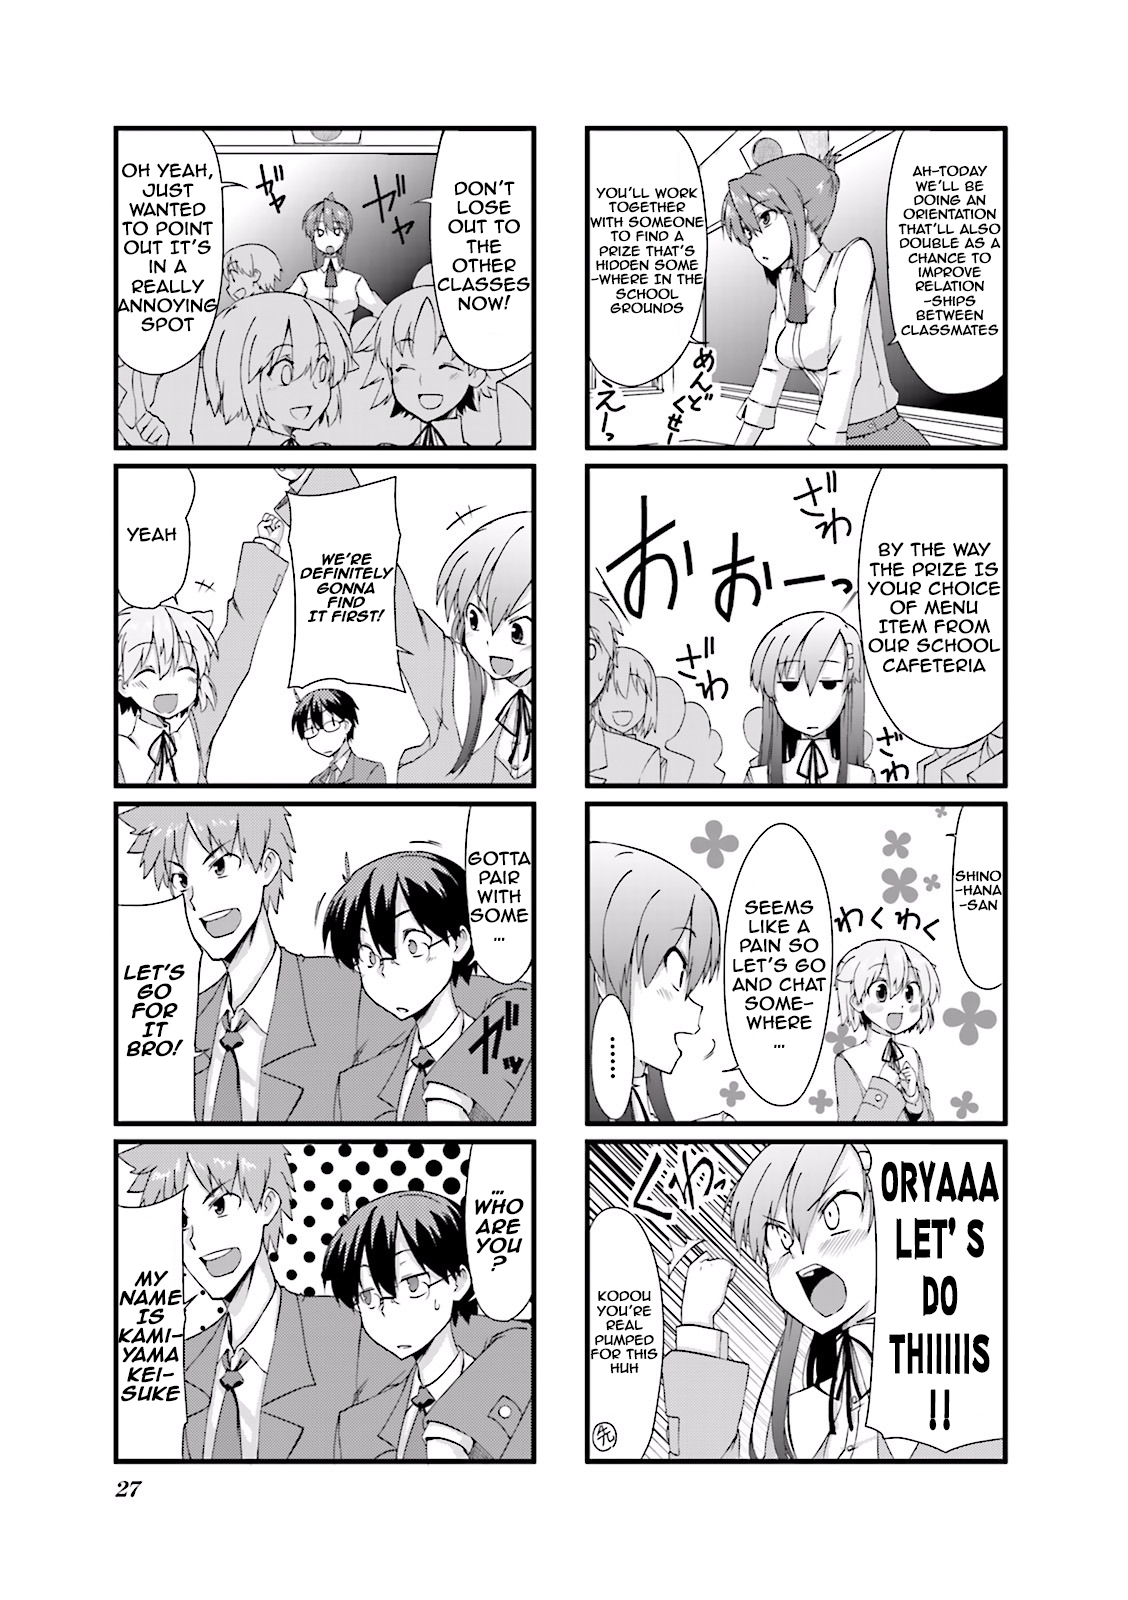 Power of Smile. Vol. 1 Ch. 4